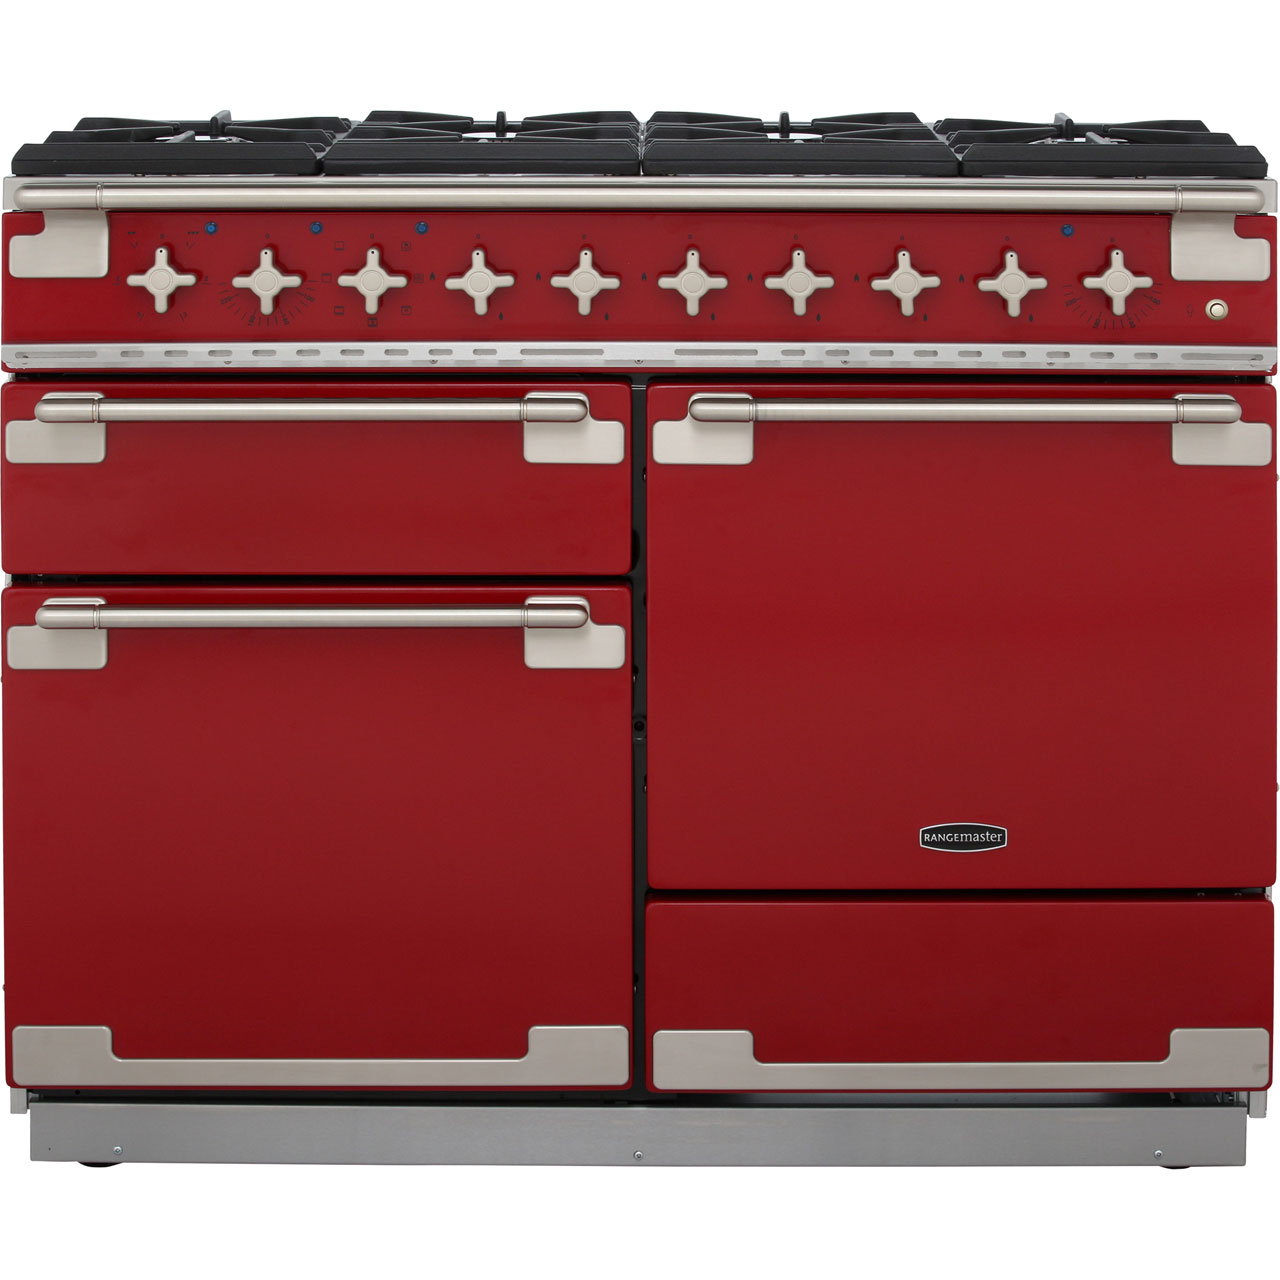 Rangemaster Elise ELS110DFFRD 110cm Dual Fuel Range Cooker - Cherry Red - A/A Rated, Red